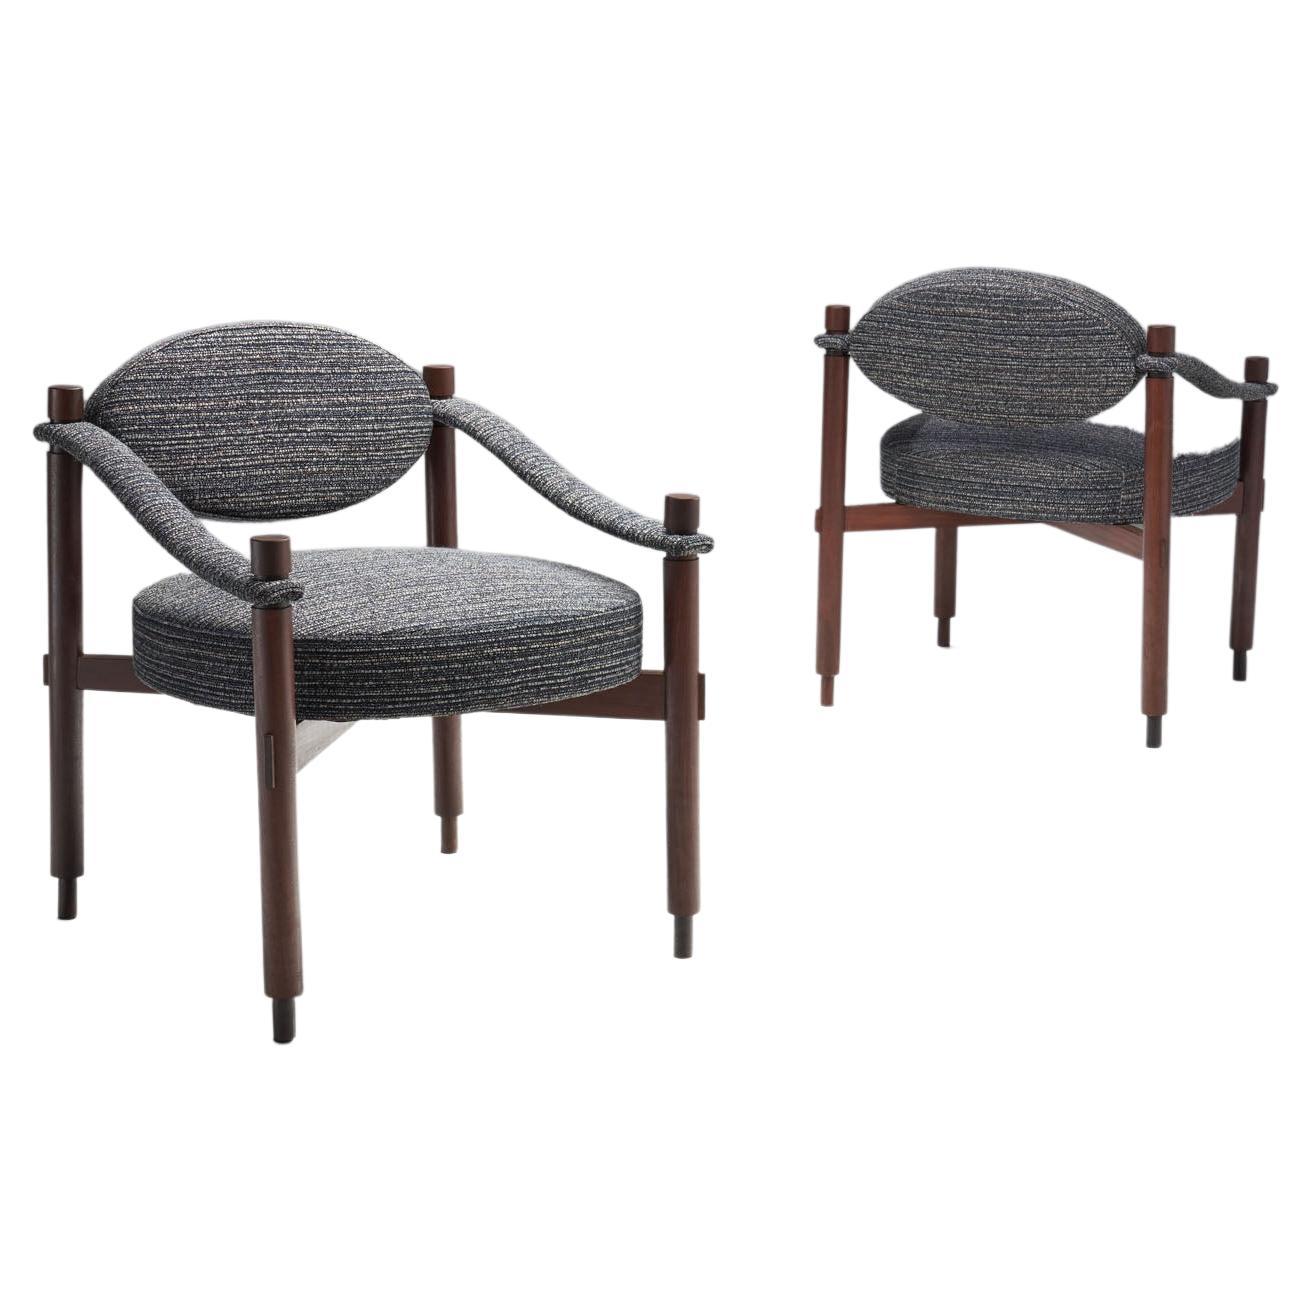 Pair of Mid-Century Armchairs by Raffaella Crespi for Mobilia, Italy, 1960s For Sale